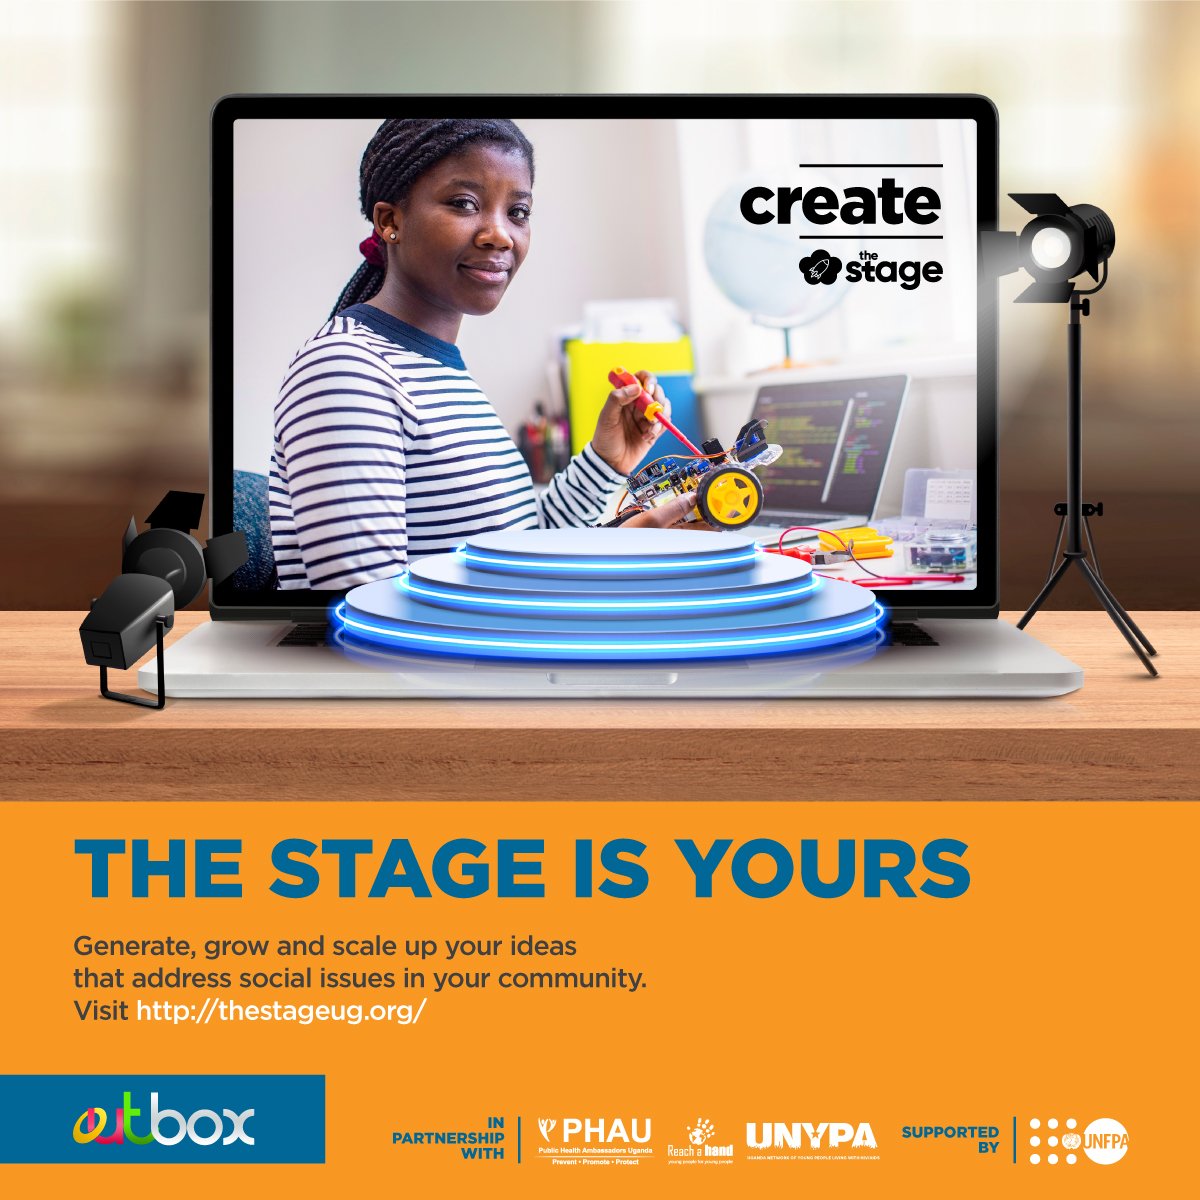 Does your heart beat for social change in your community as a young person? 

Now is the time to:- 
SHOWCASE 🤹
CONVENE☕
CREATE 🧑‍🔧
INNOVATE🤳🤖
IDEATE 🧐
ENGAGE 🙋

At 'The Stage': thestageug.org

#TheStageIsYours it's your platform 🤹🙋🤳